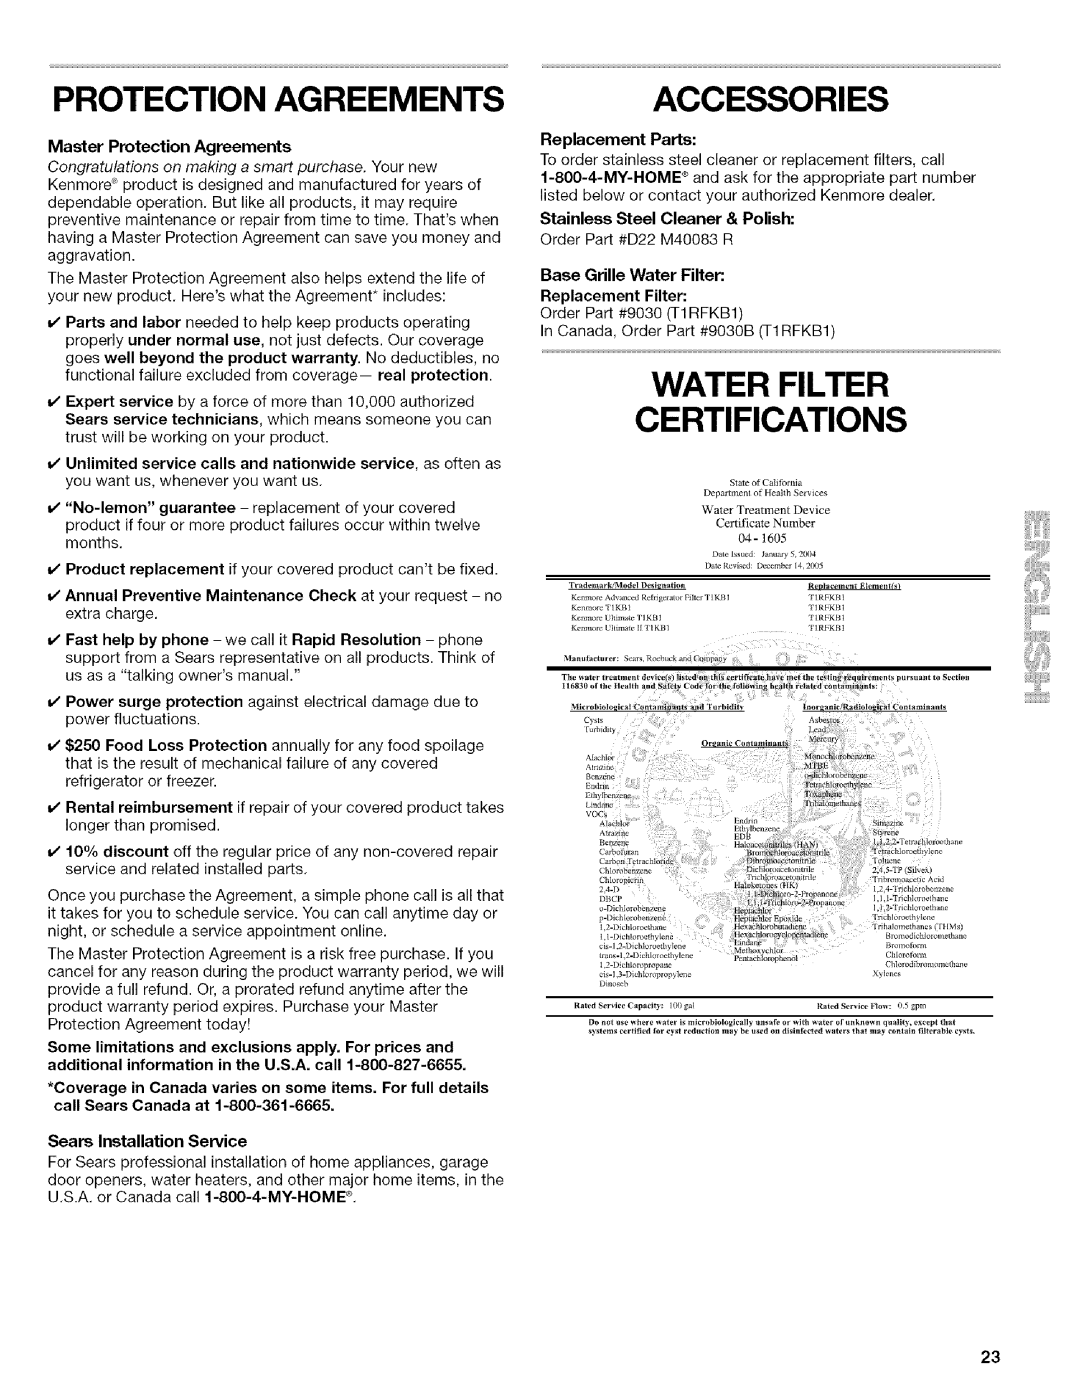 Kenmore 10657072601 manual Water Filter, Certifications, Accessories, Master Protection Agreements, Replacement Parts 